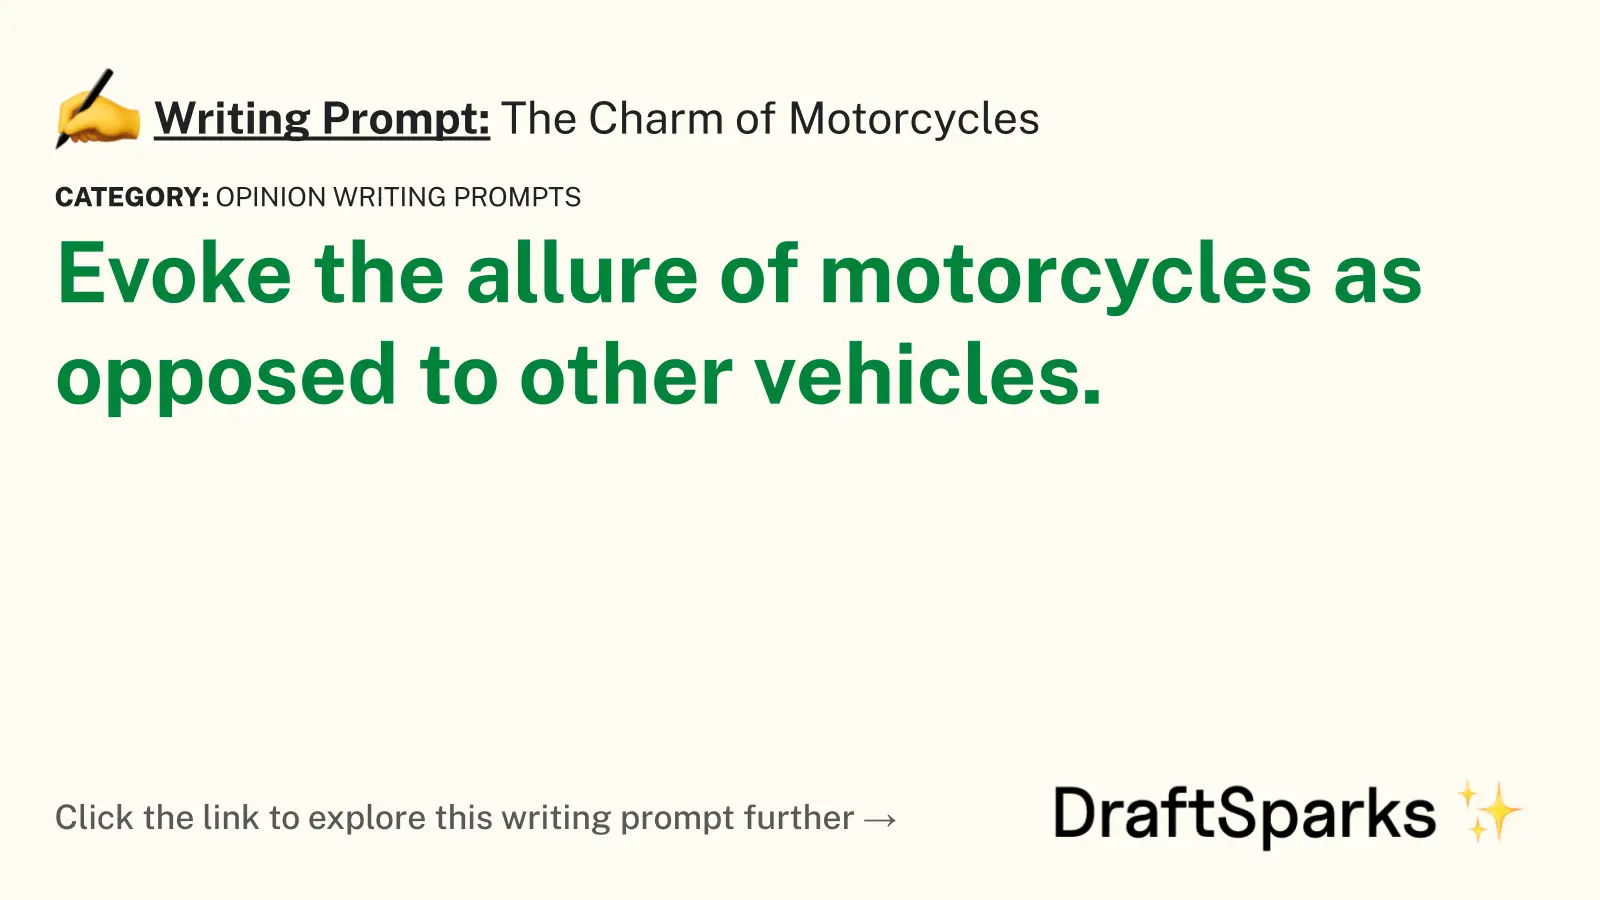 The Charm of Motorcycles